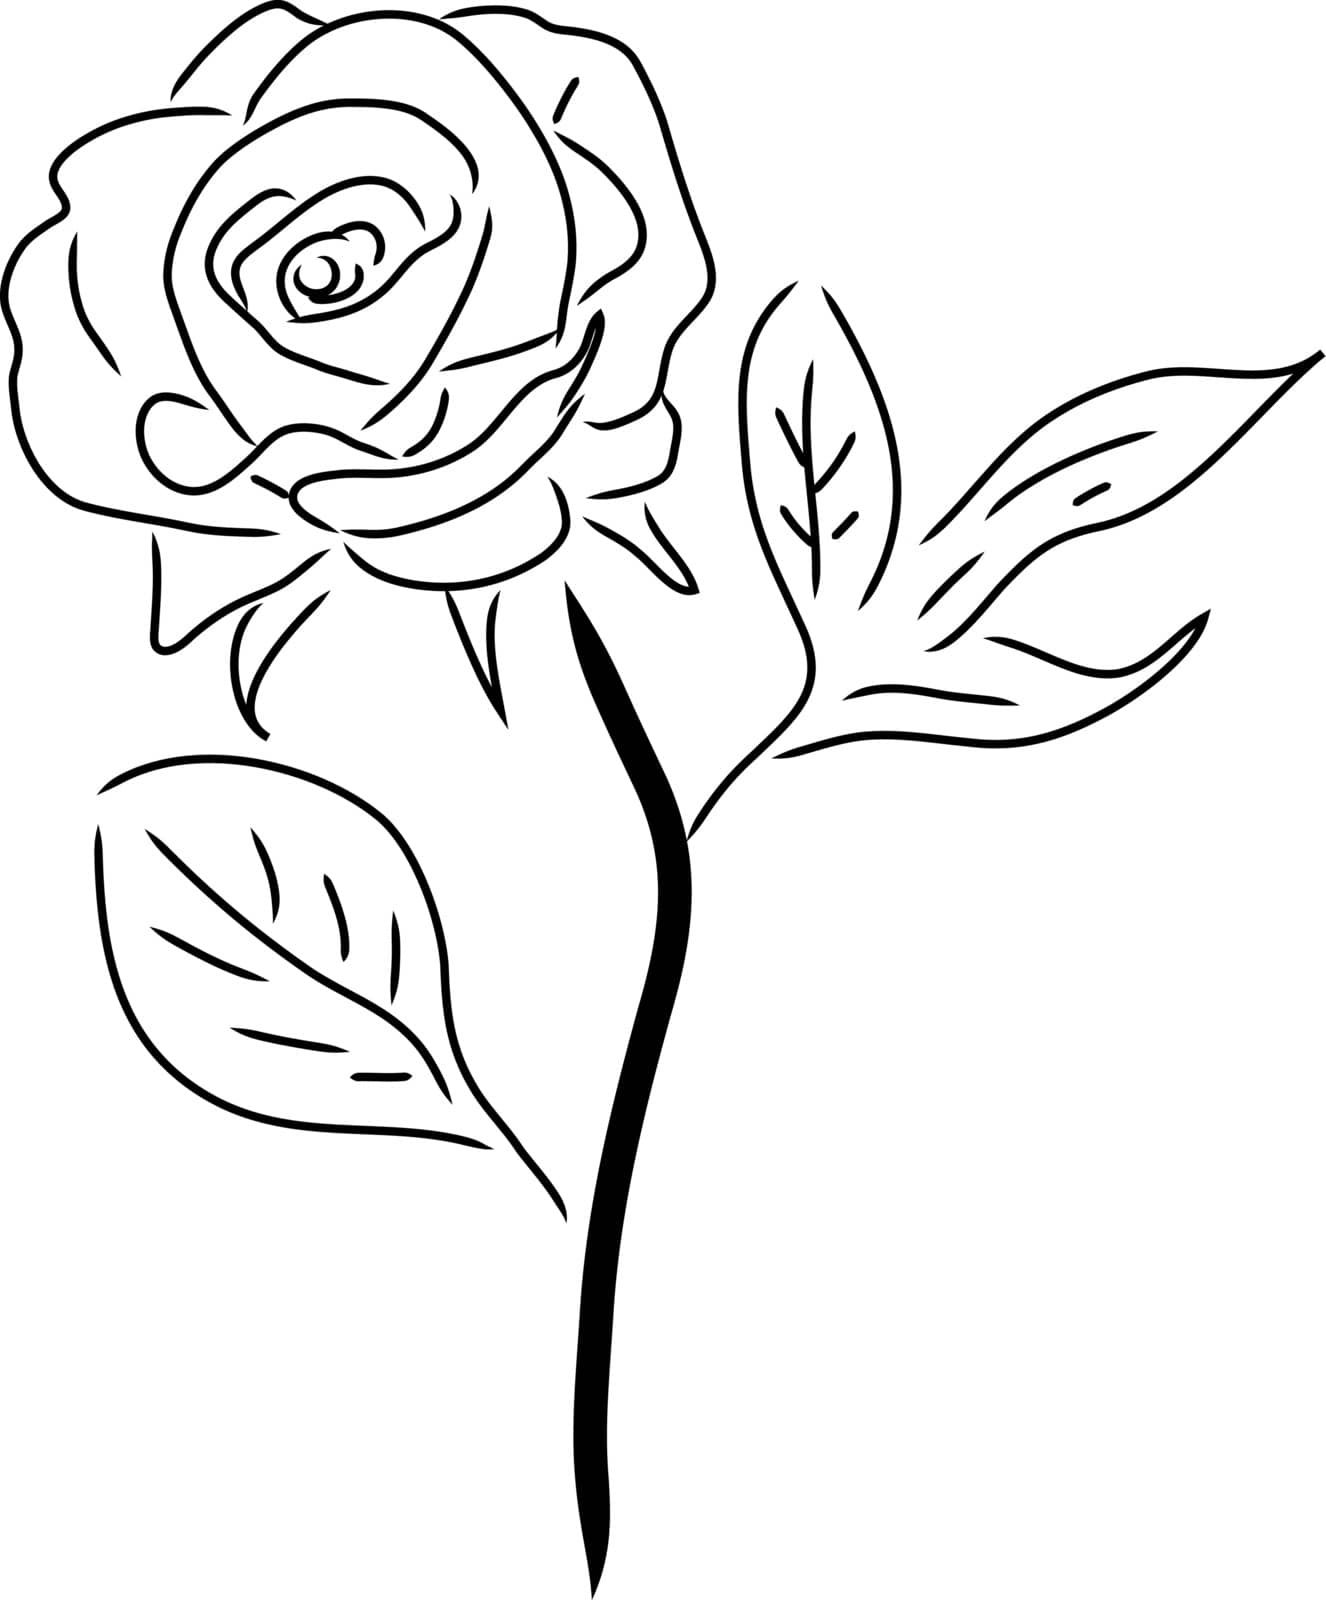 Red Rose isolated on white, vector illustration by aarrows